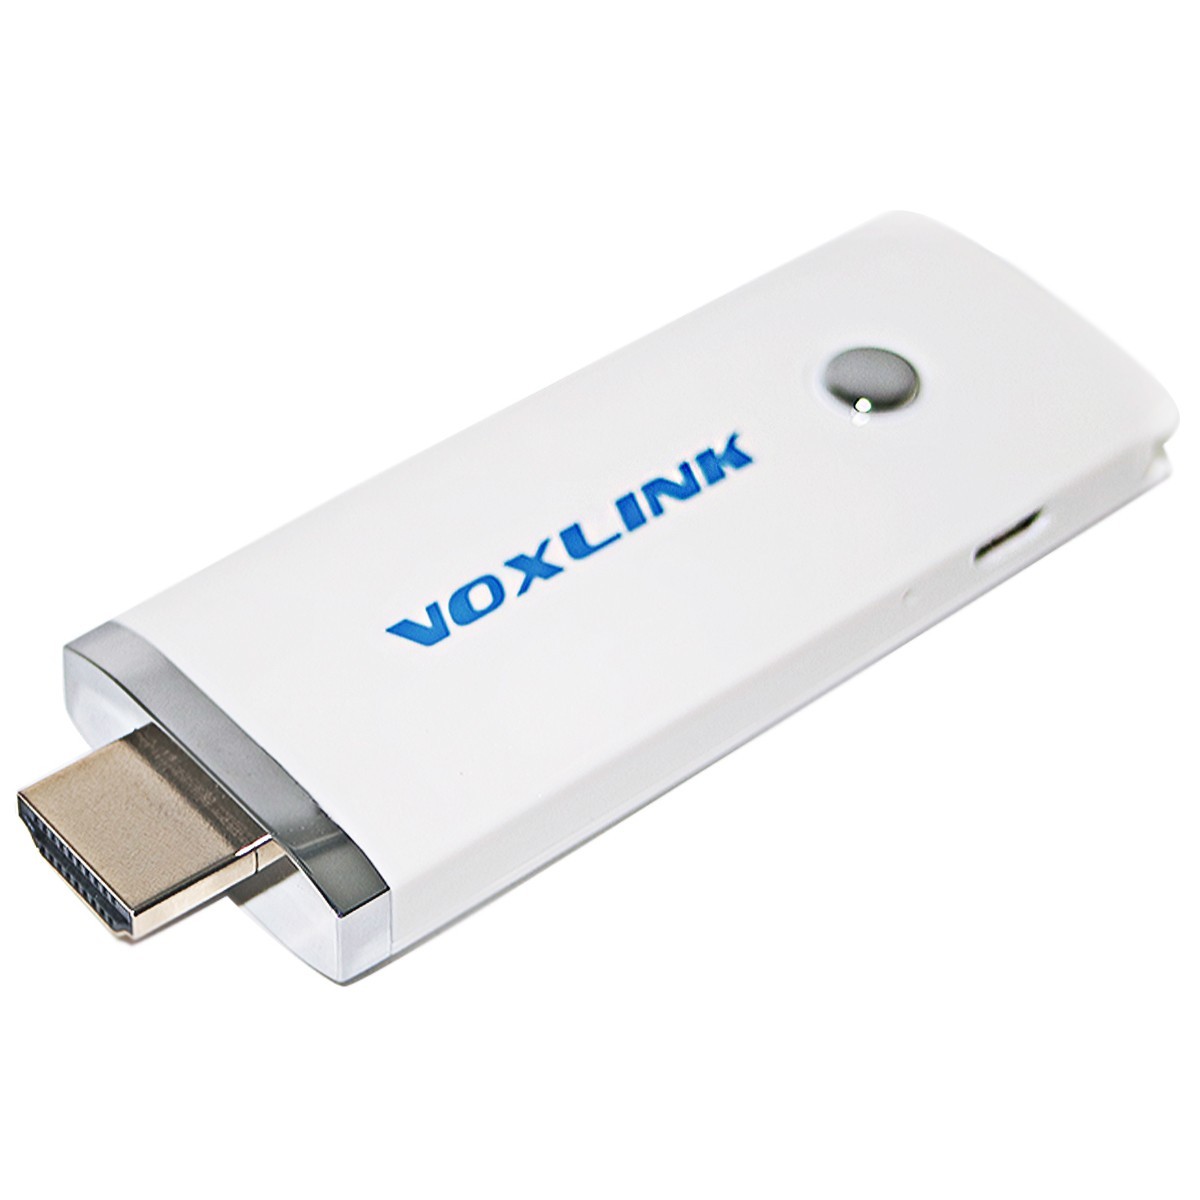 Voxlink 2.4G 150M 1080P WIFI Display TV Dongle HDMI Adapter